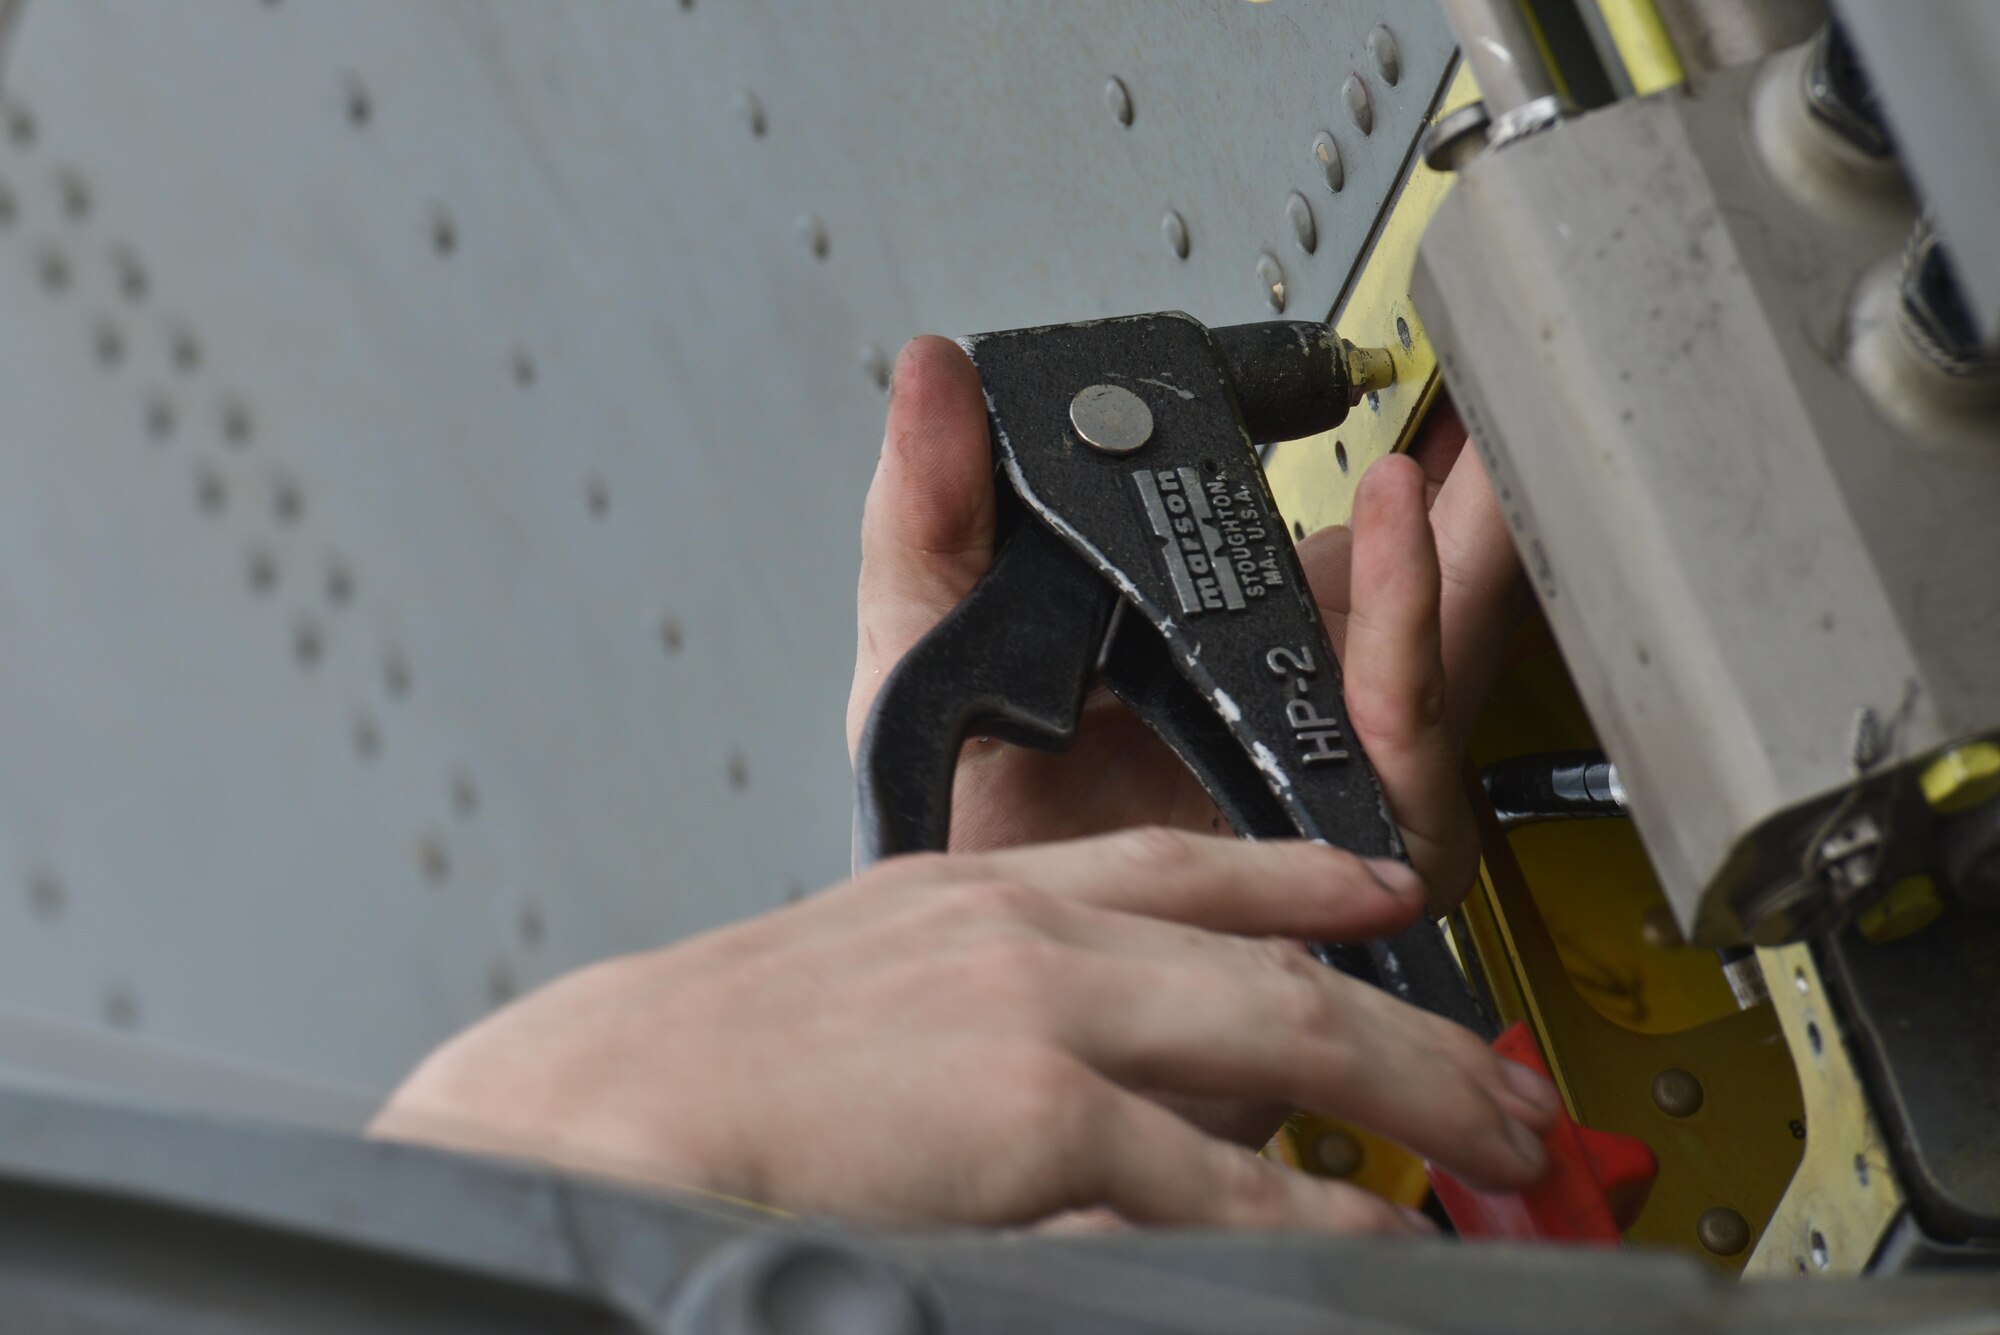 Senior Airman Adam Bentz, 379th Expeditionary Maintenance Squadron's fabrication flight, inserts new rivets to a fabricated KC-135 Stratotanker spoiler access panel August 4, 2015 at Al Udeid Air Base, Qatar. The fabrications flight is partitioned into the aircraft structural maintenance and metal technology sections that make on-site repairs to aircraft deployed to Al Udeid. Most fabrications can be conducted on the flight line. For others, Airmen would bring in the part or create what is needed to keep the aircraft flying within hours. (U.S. Air Force photo/ Staff Sgt. Alexandre Montes)